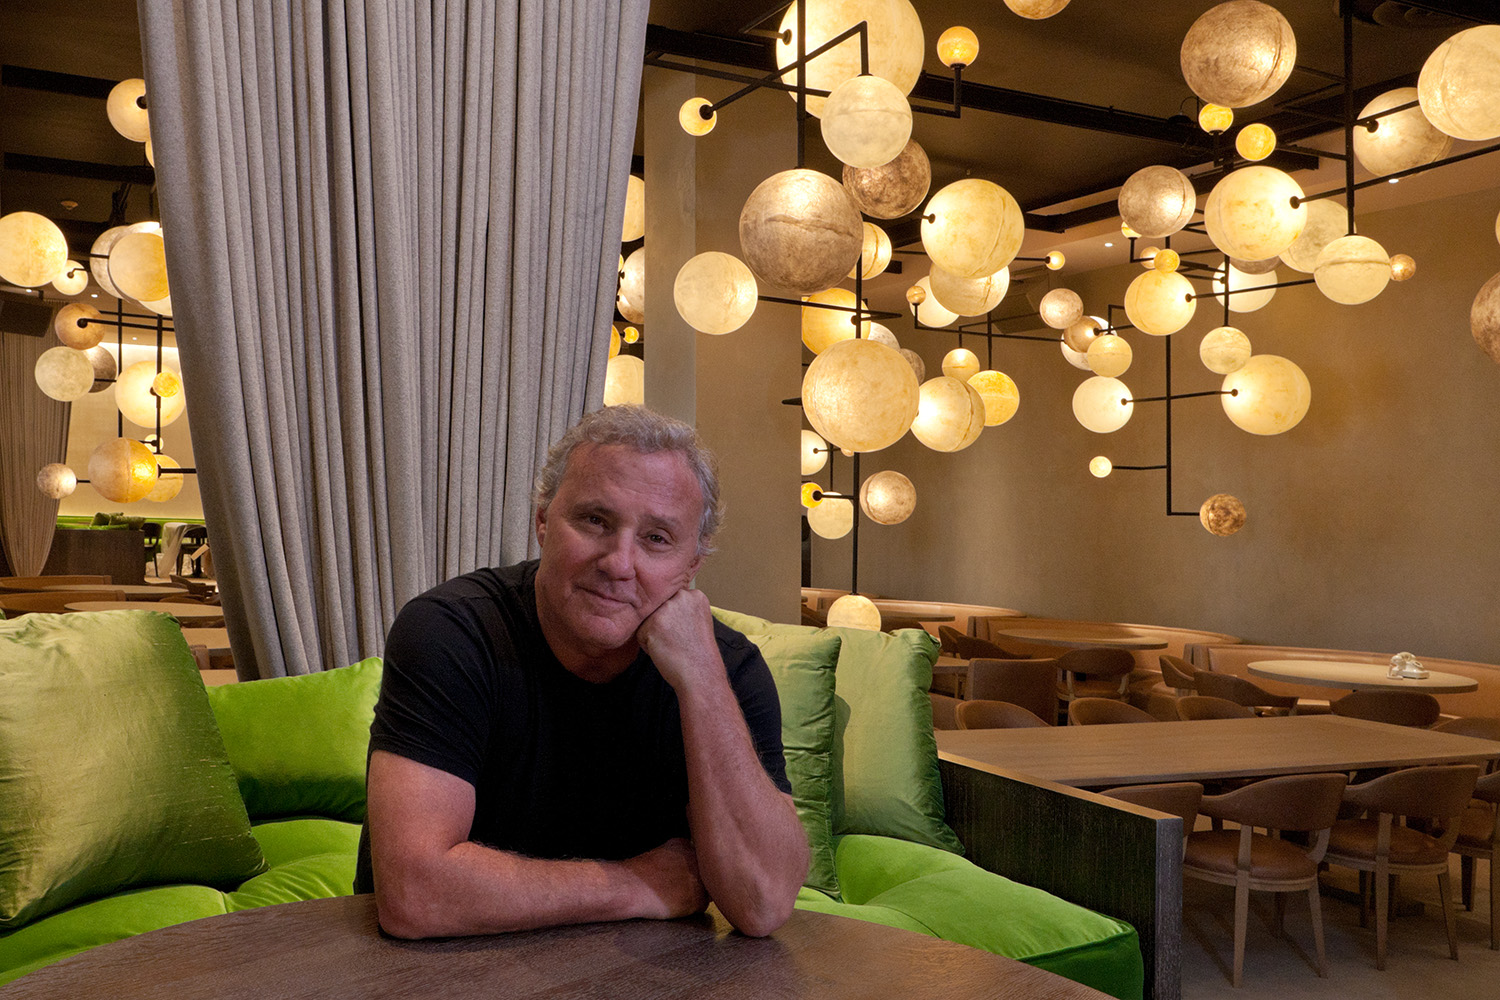 Ian Schrager / The Public (Ambassador East Hotel) / Chicago IL / For The New York Times